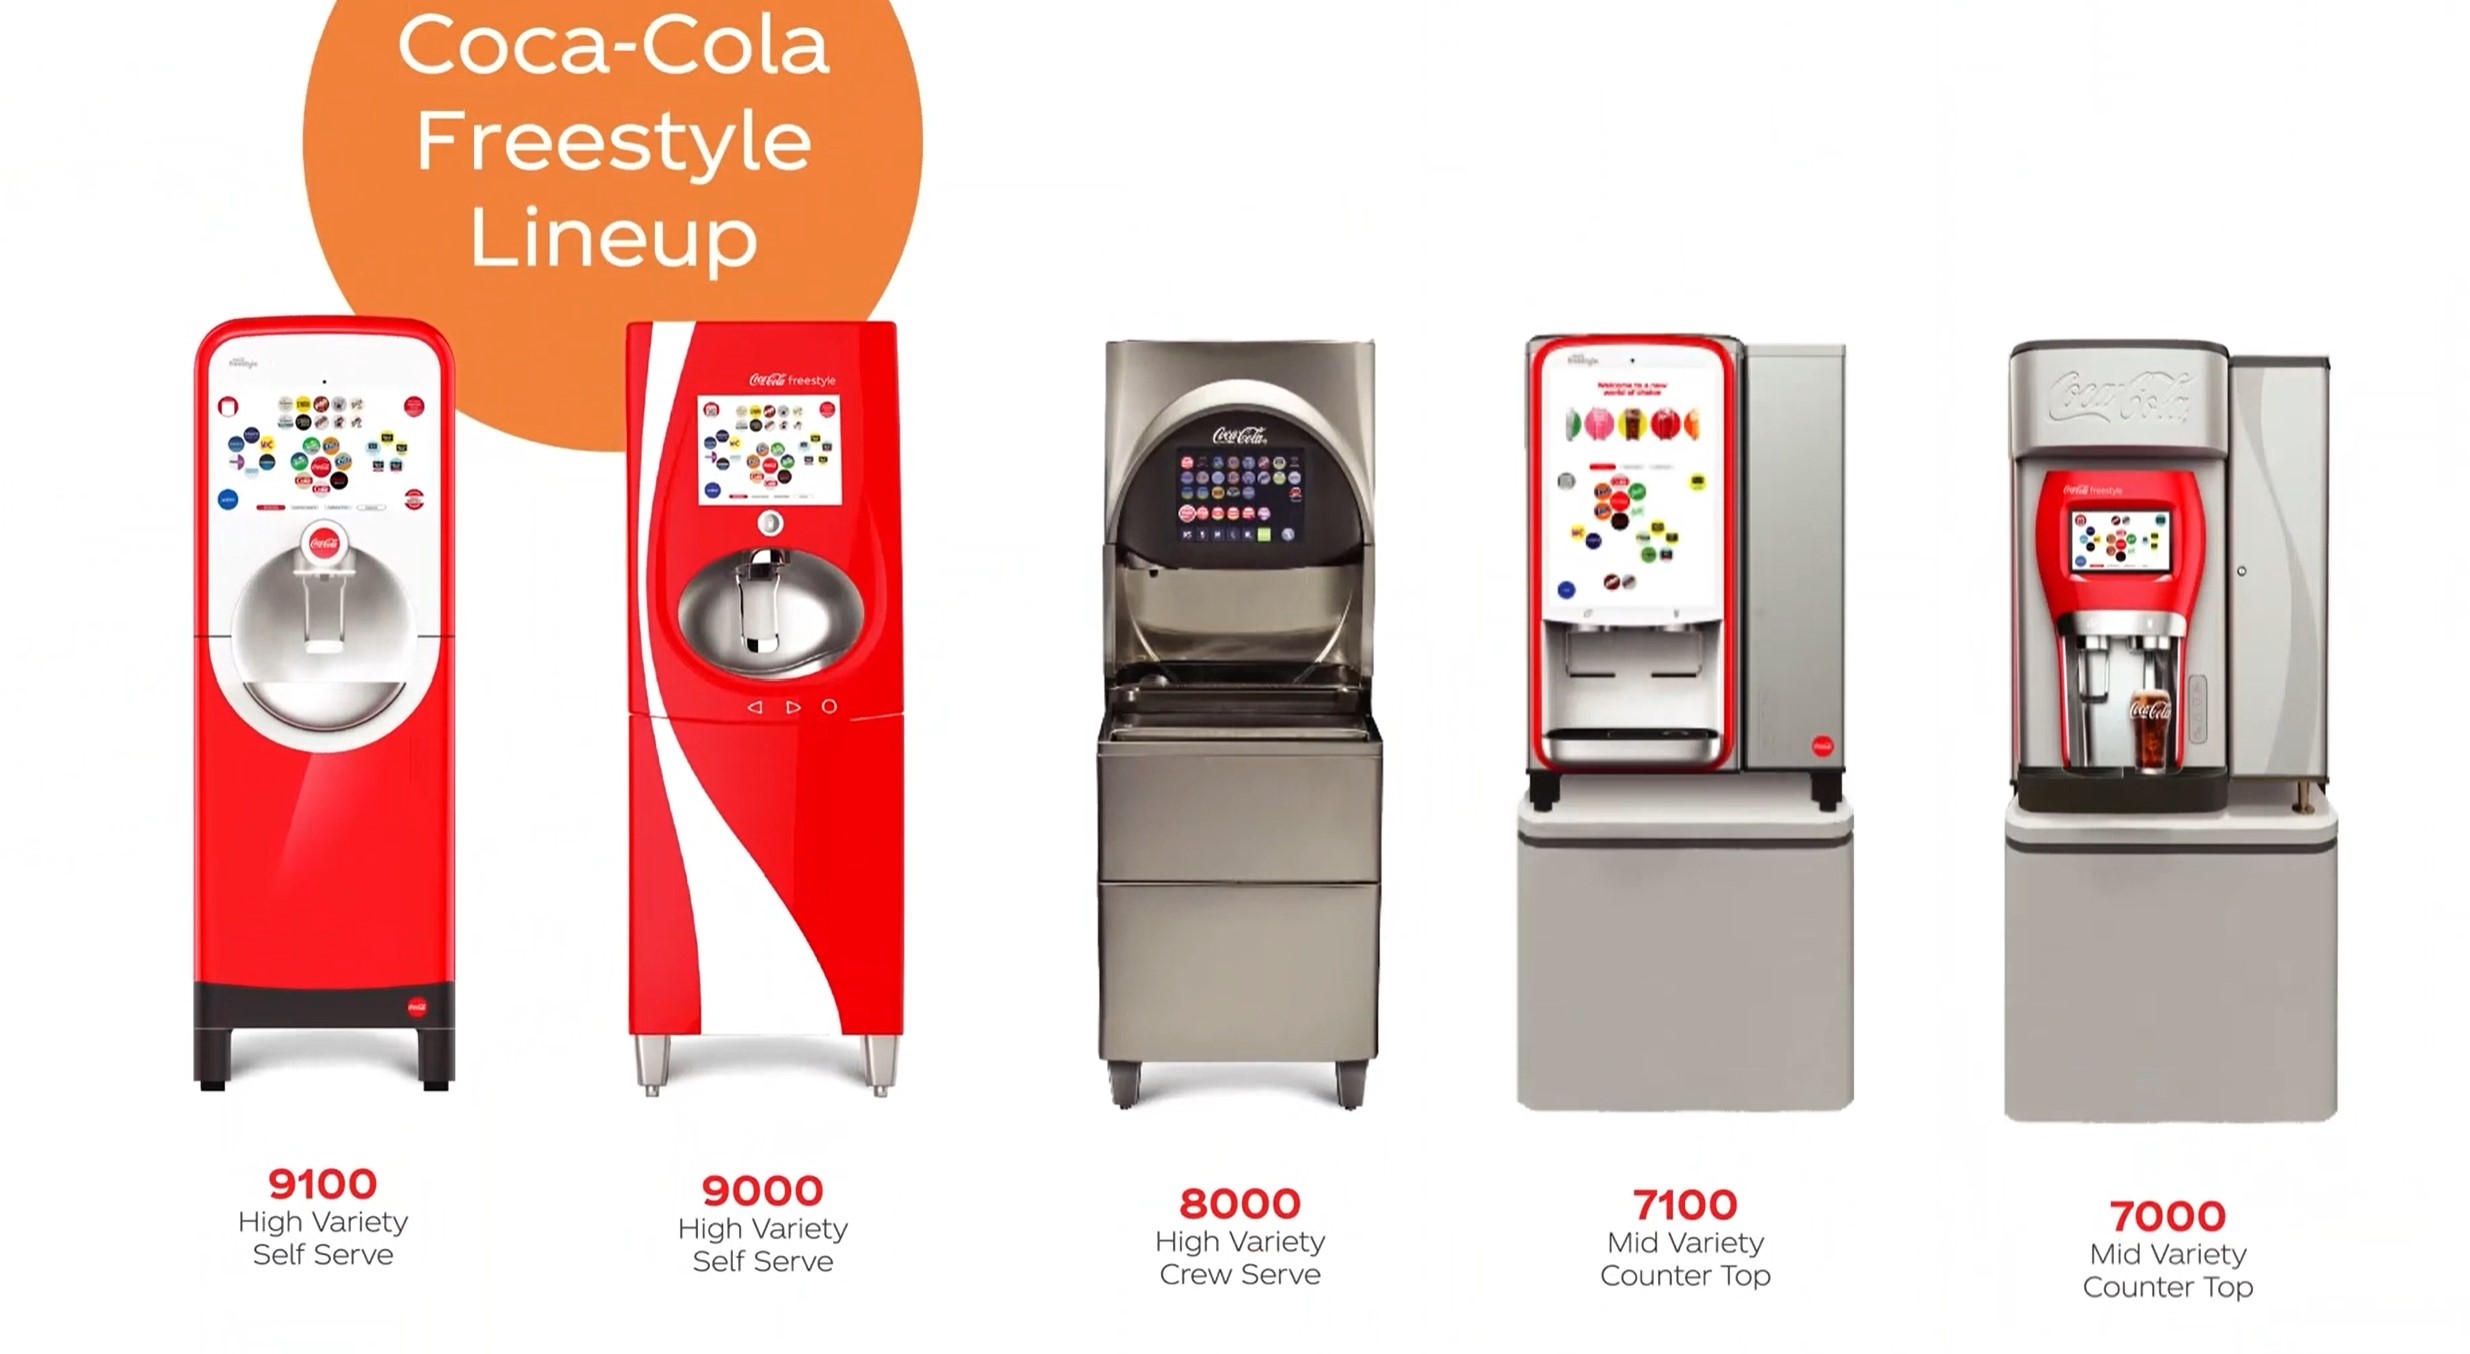 Coca-Cola United uses Power Automate RPA to automate legacy processes